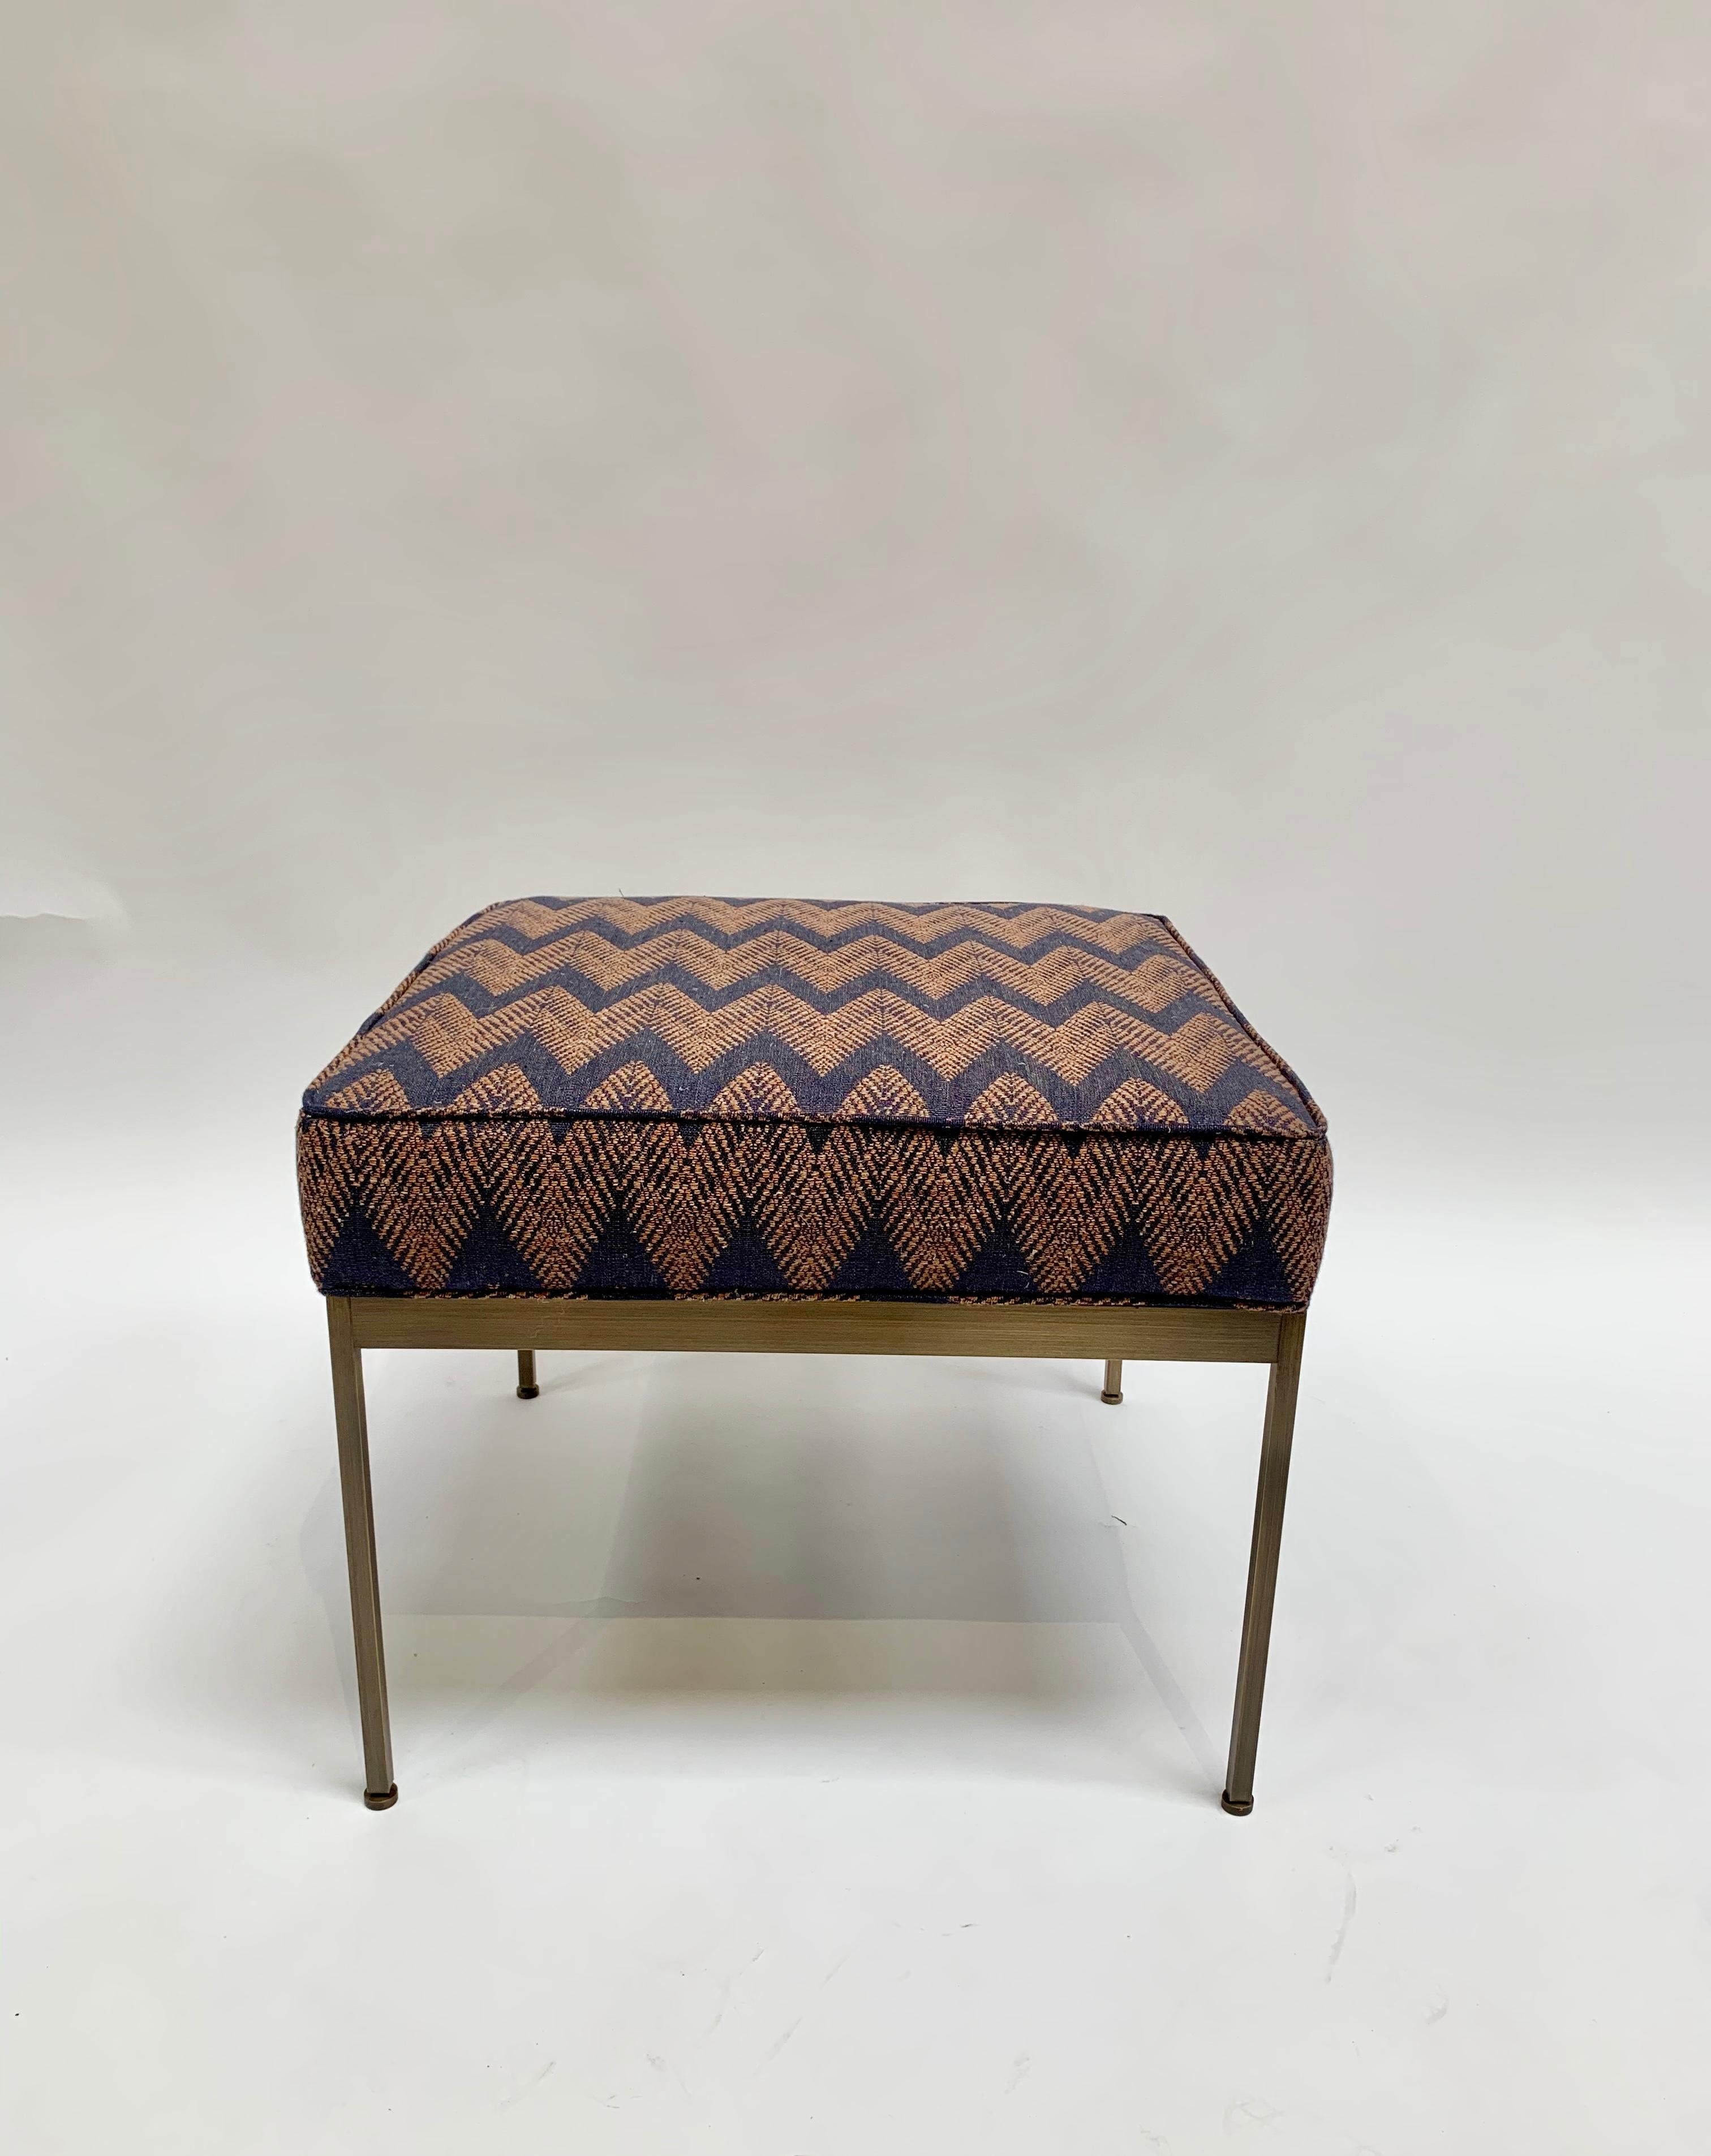 The Paul ottoman features a solid lacquered brass base and an upholstered seat with piping. Each leg features a rounded leveler.

The Lawson-Fenning collection is designed and handmade in Los Angeles, California.

Can be made to order in various